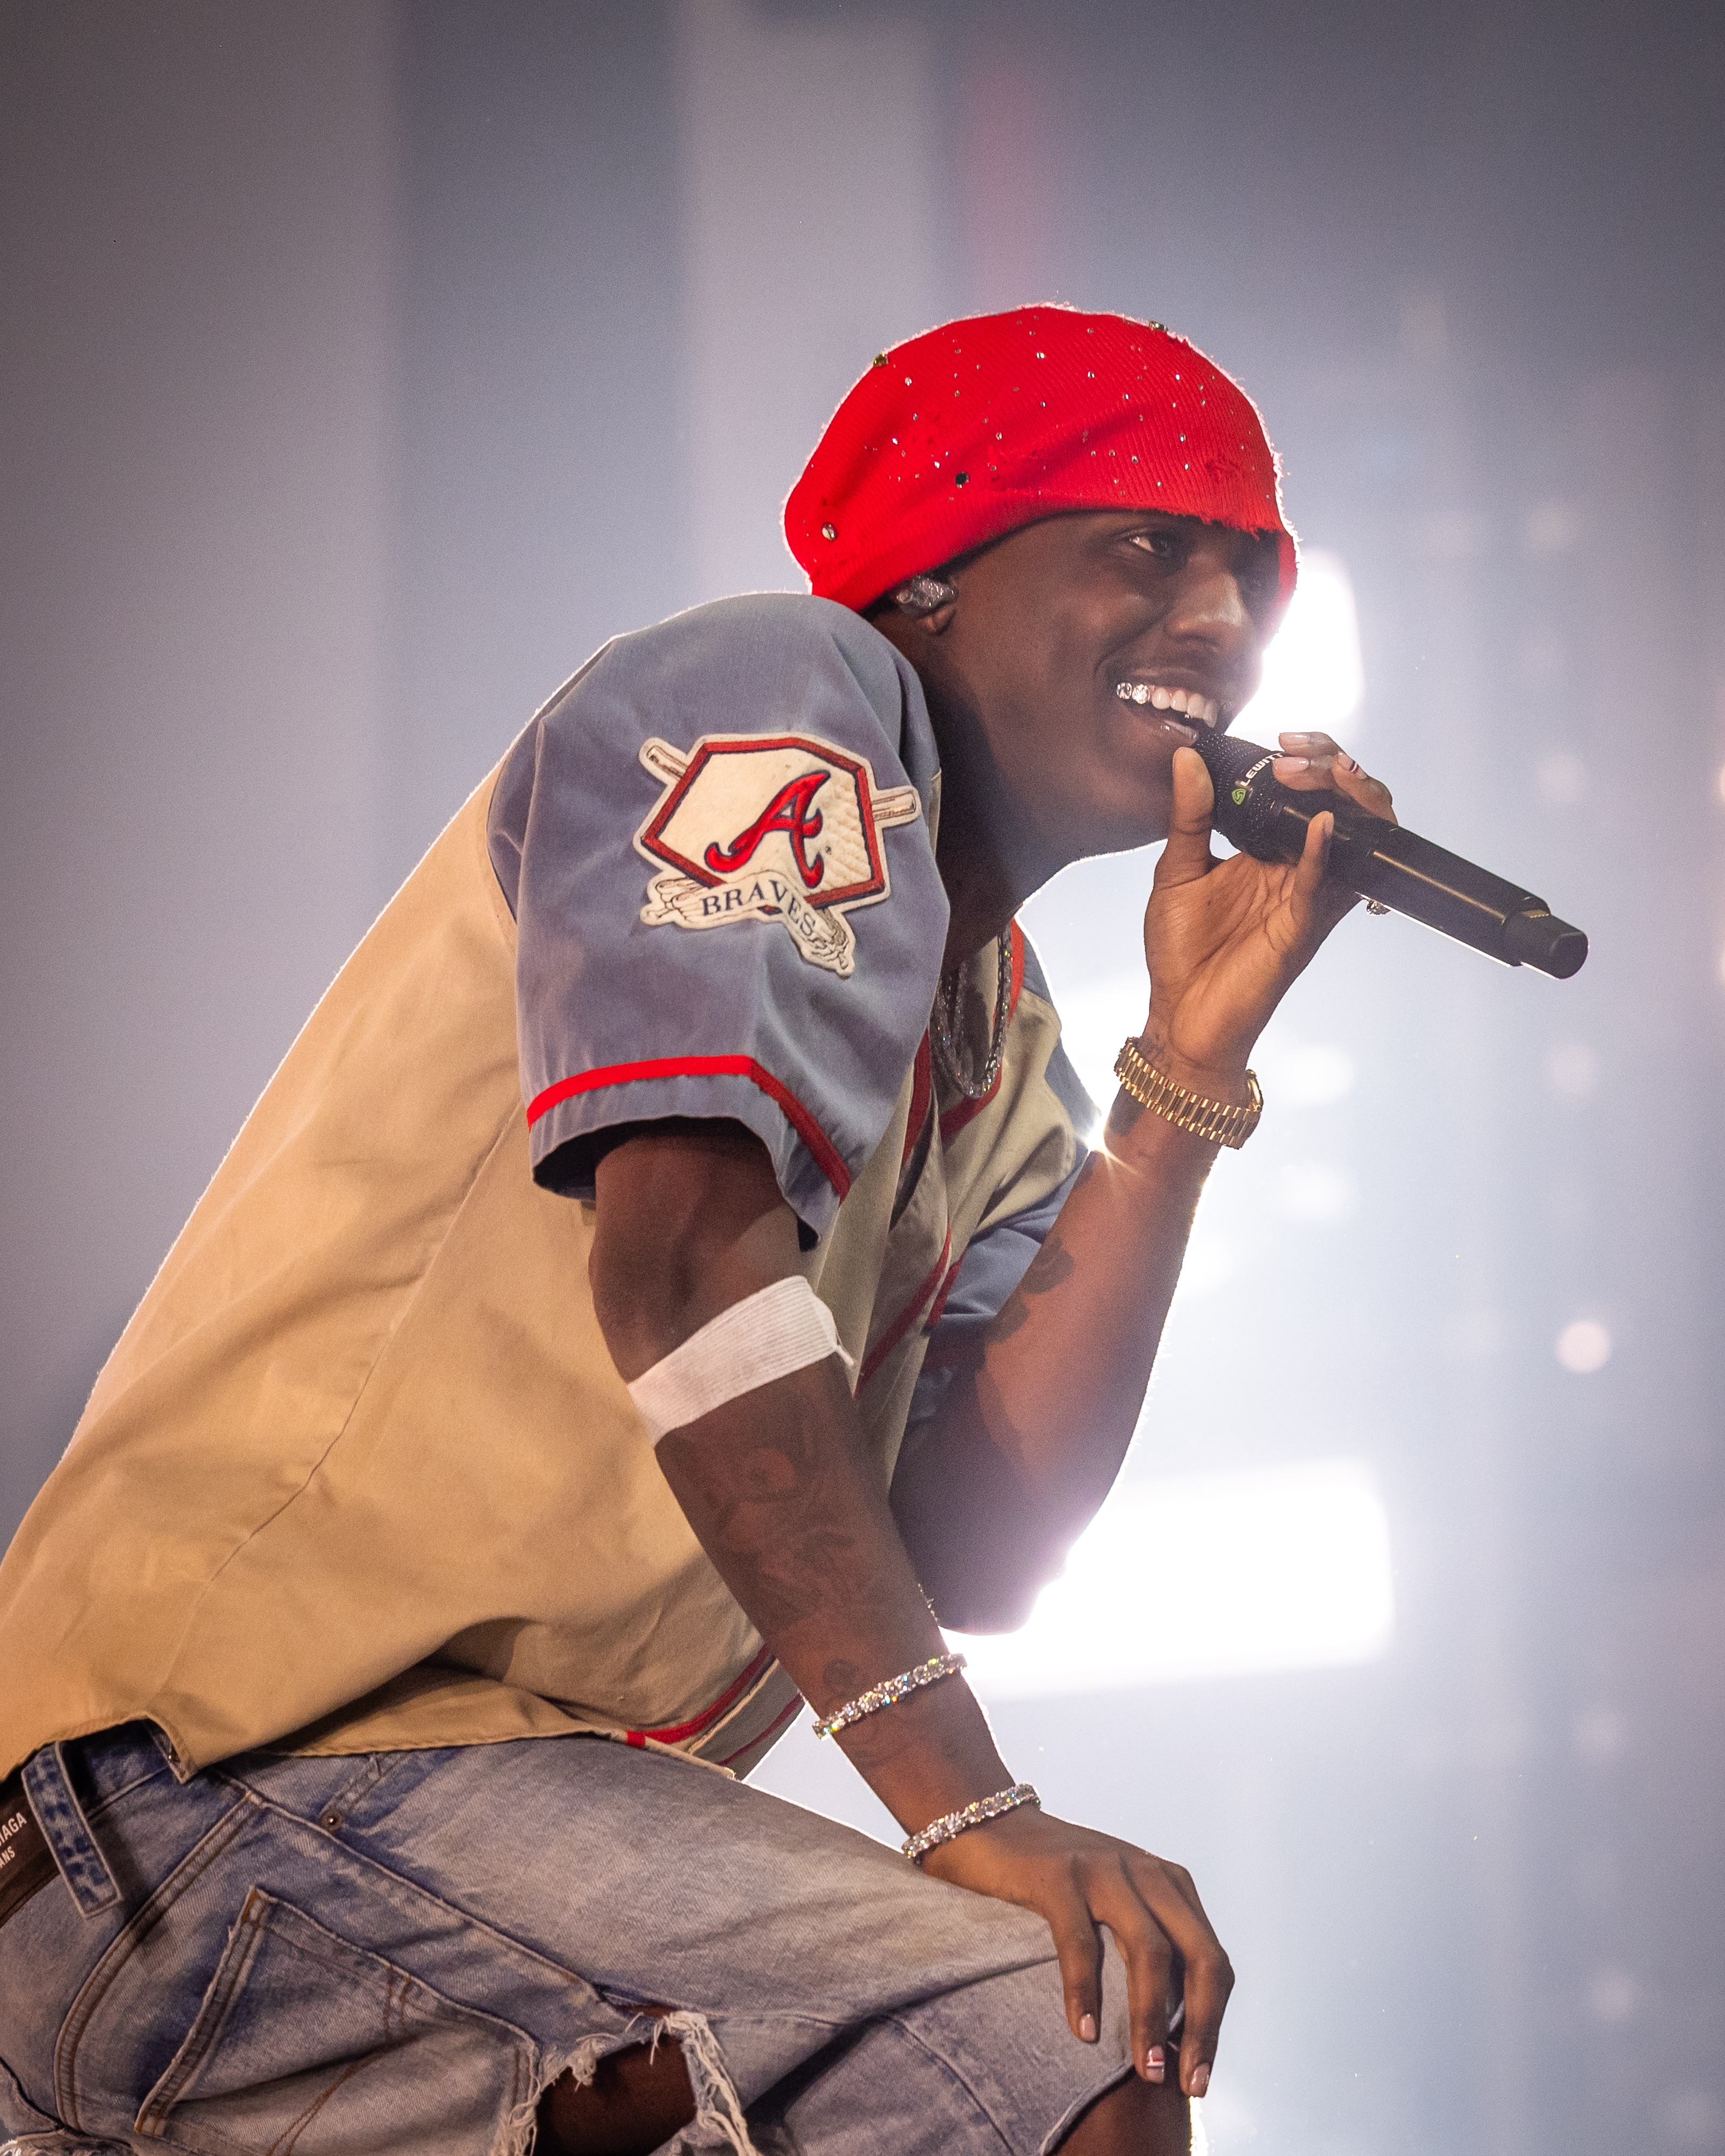 Lil Yachty New York Concert Review: Rap and Rock Hits at Central Park